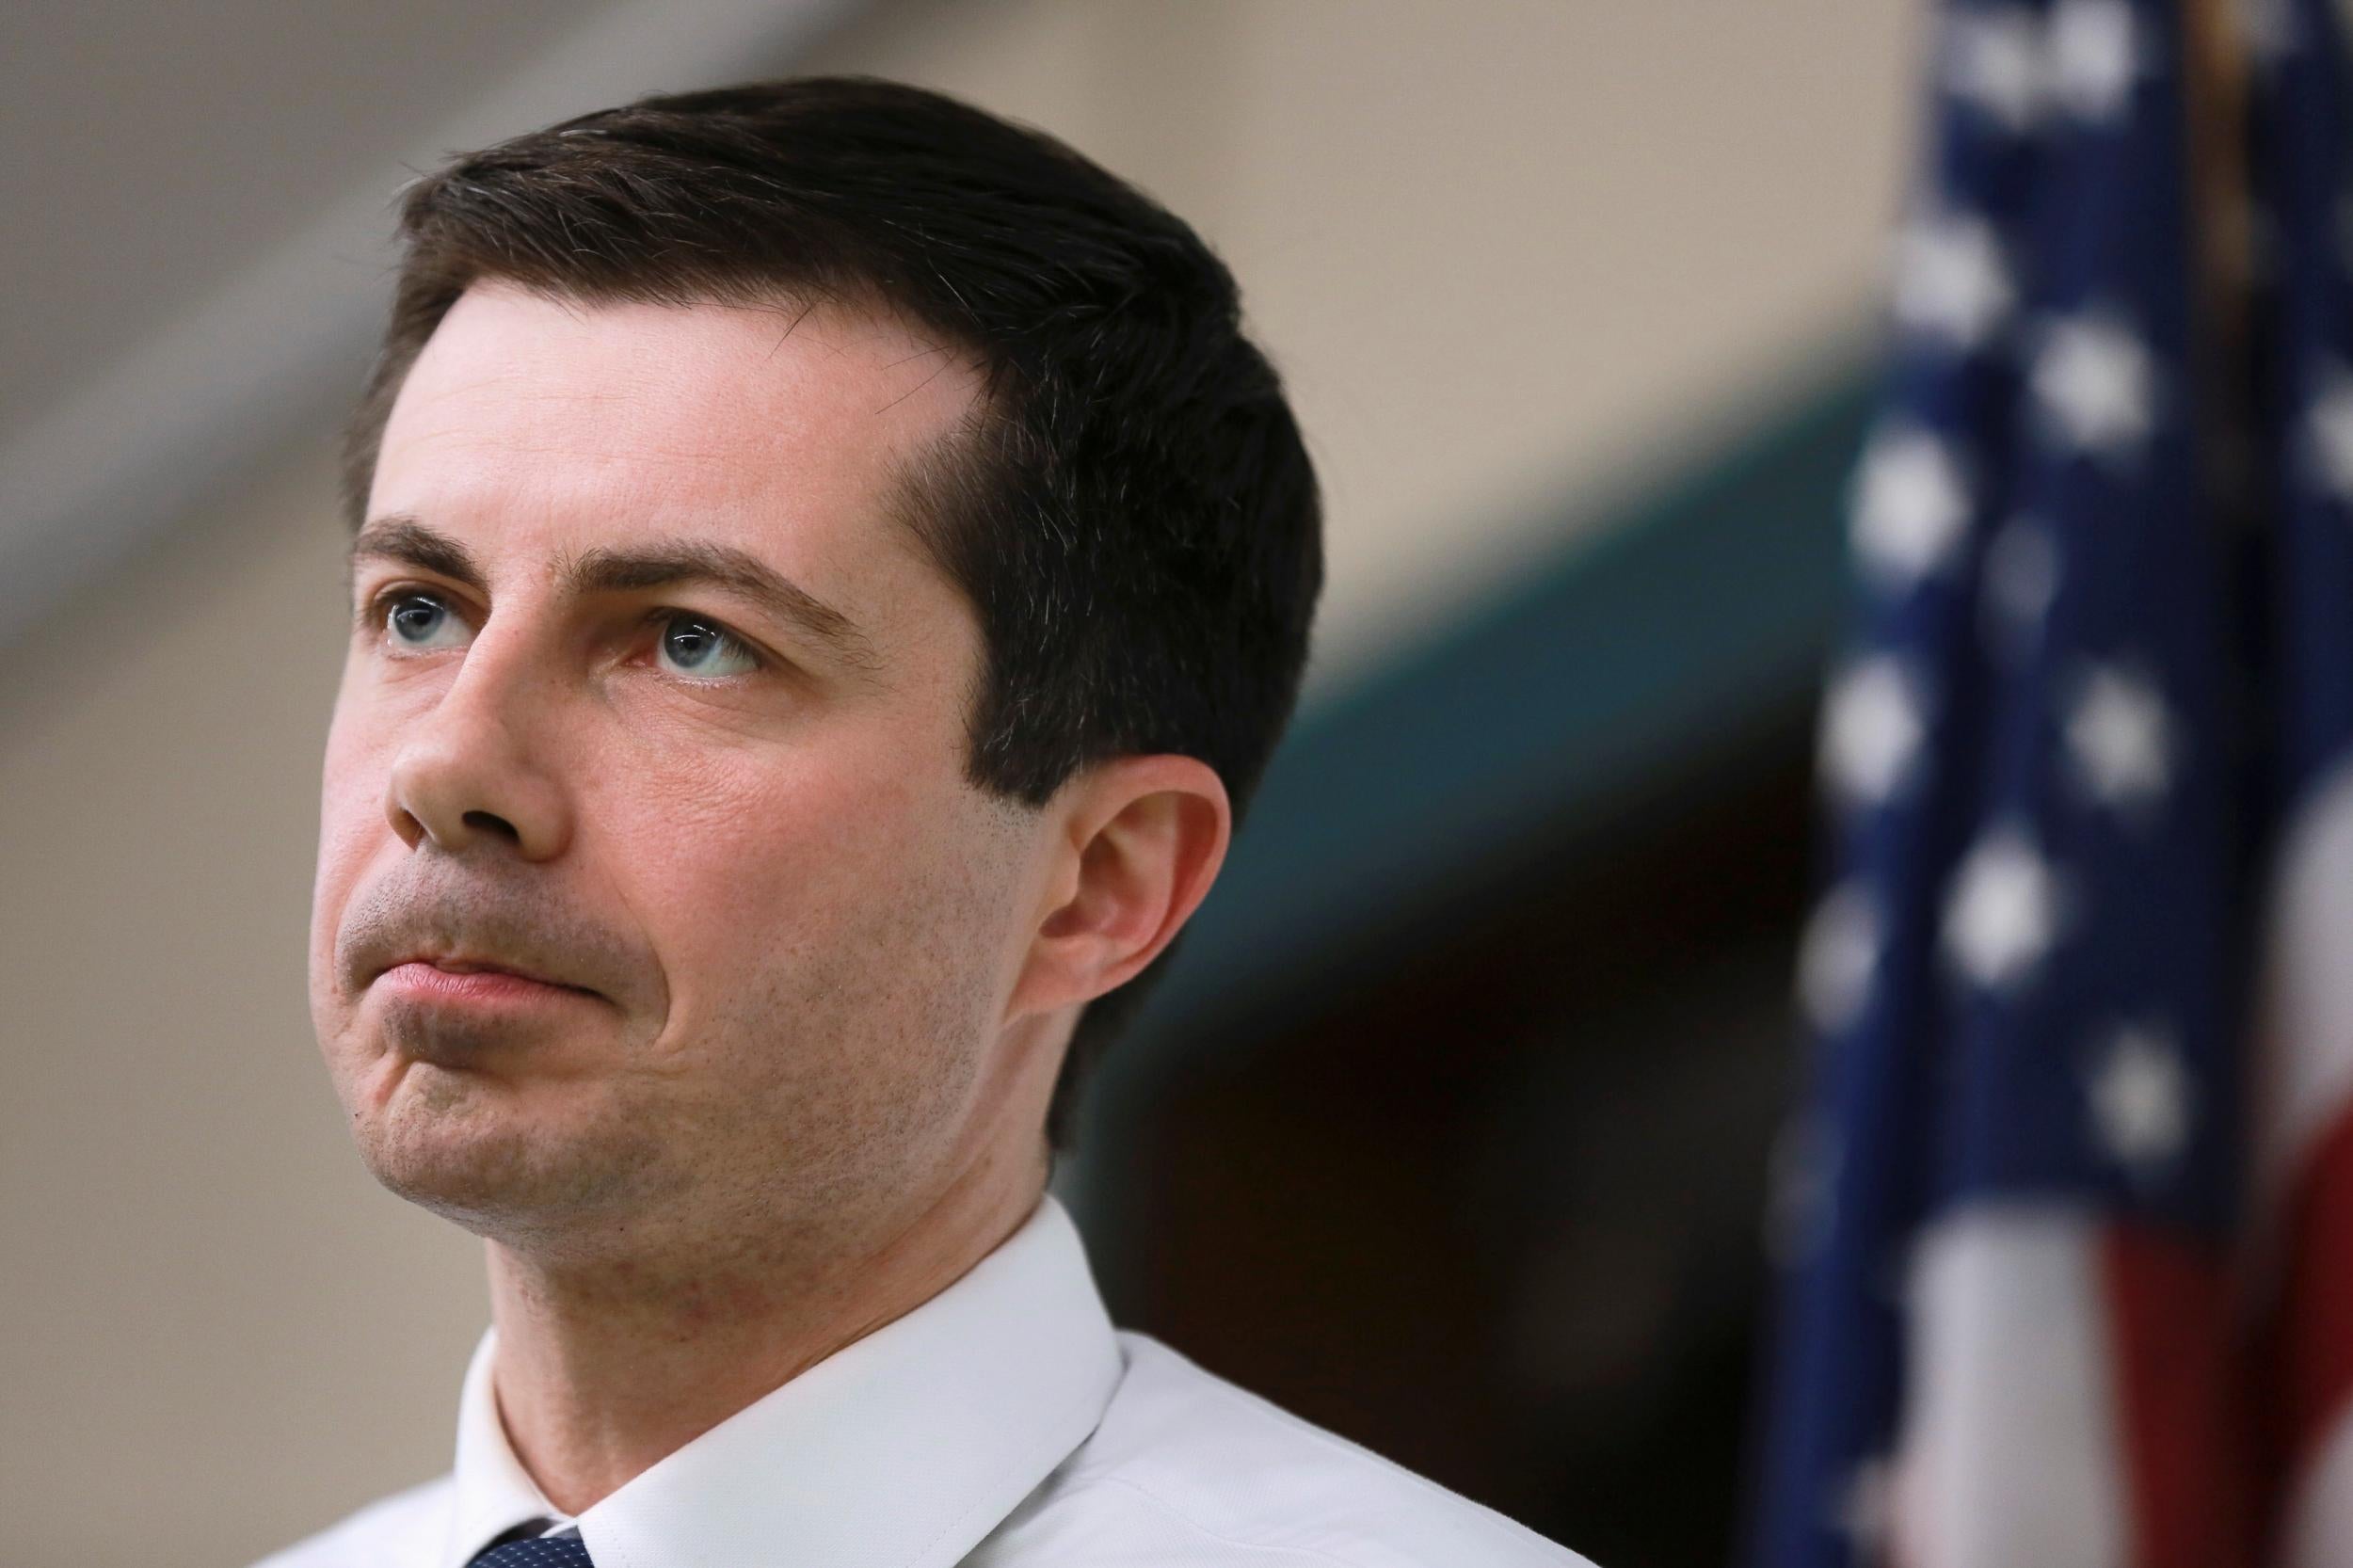 Pete Buttigieg, mayor of South Bend in Indiana